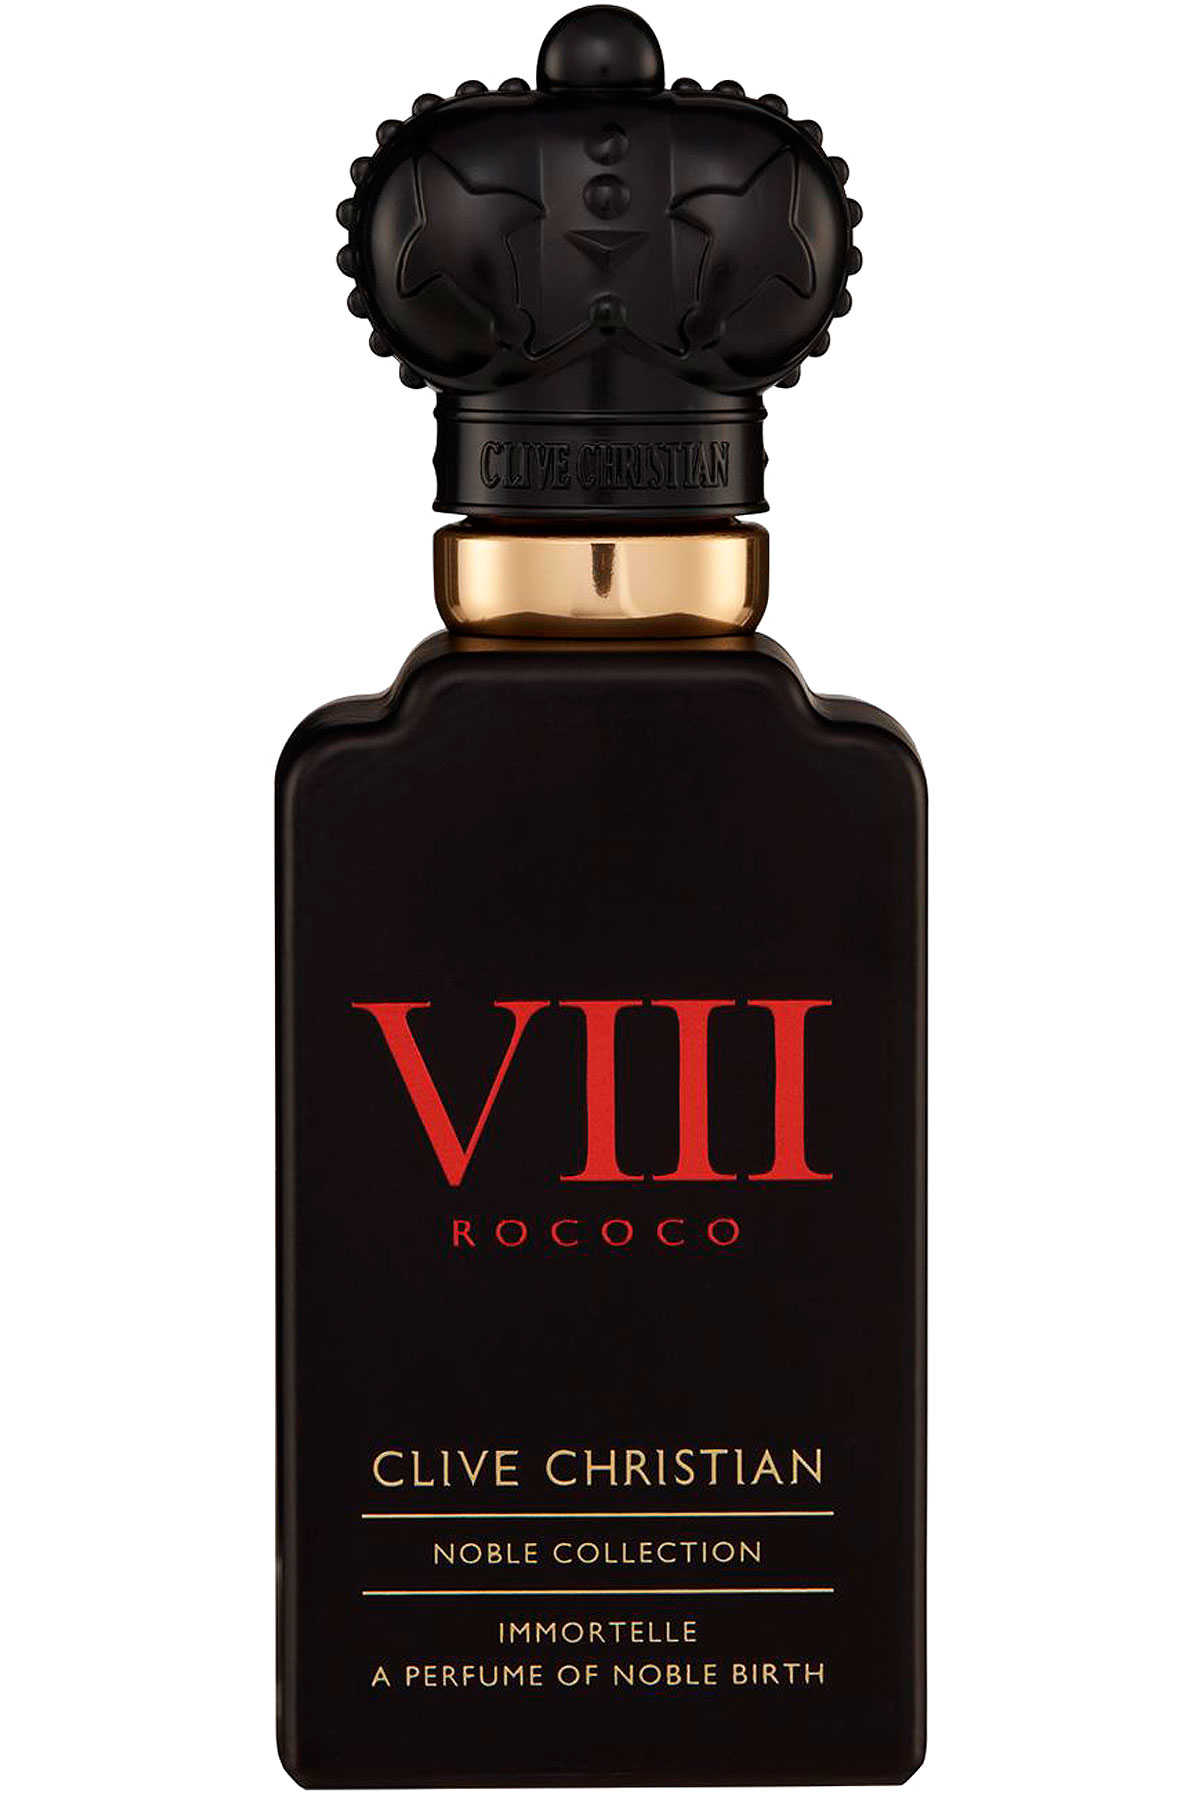 Clive Christian VIII Rococo Noble collection Immortale Perfume Spray 50ml - Feel Gorgeous